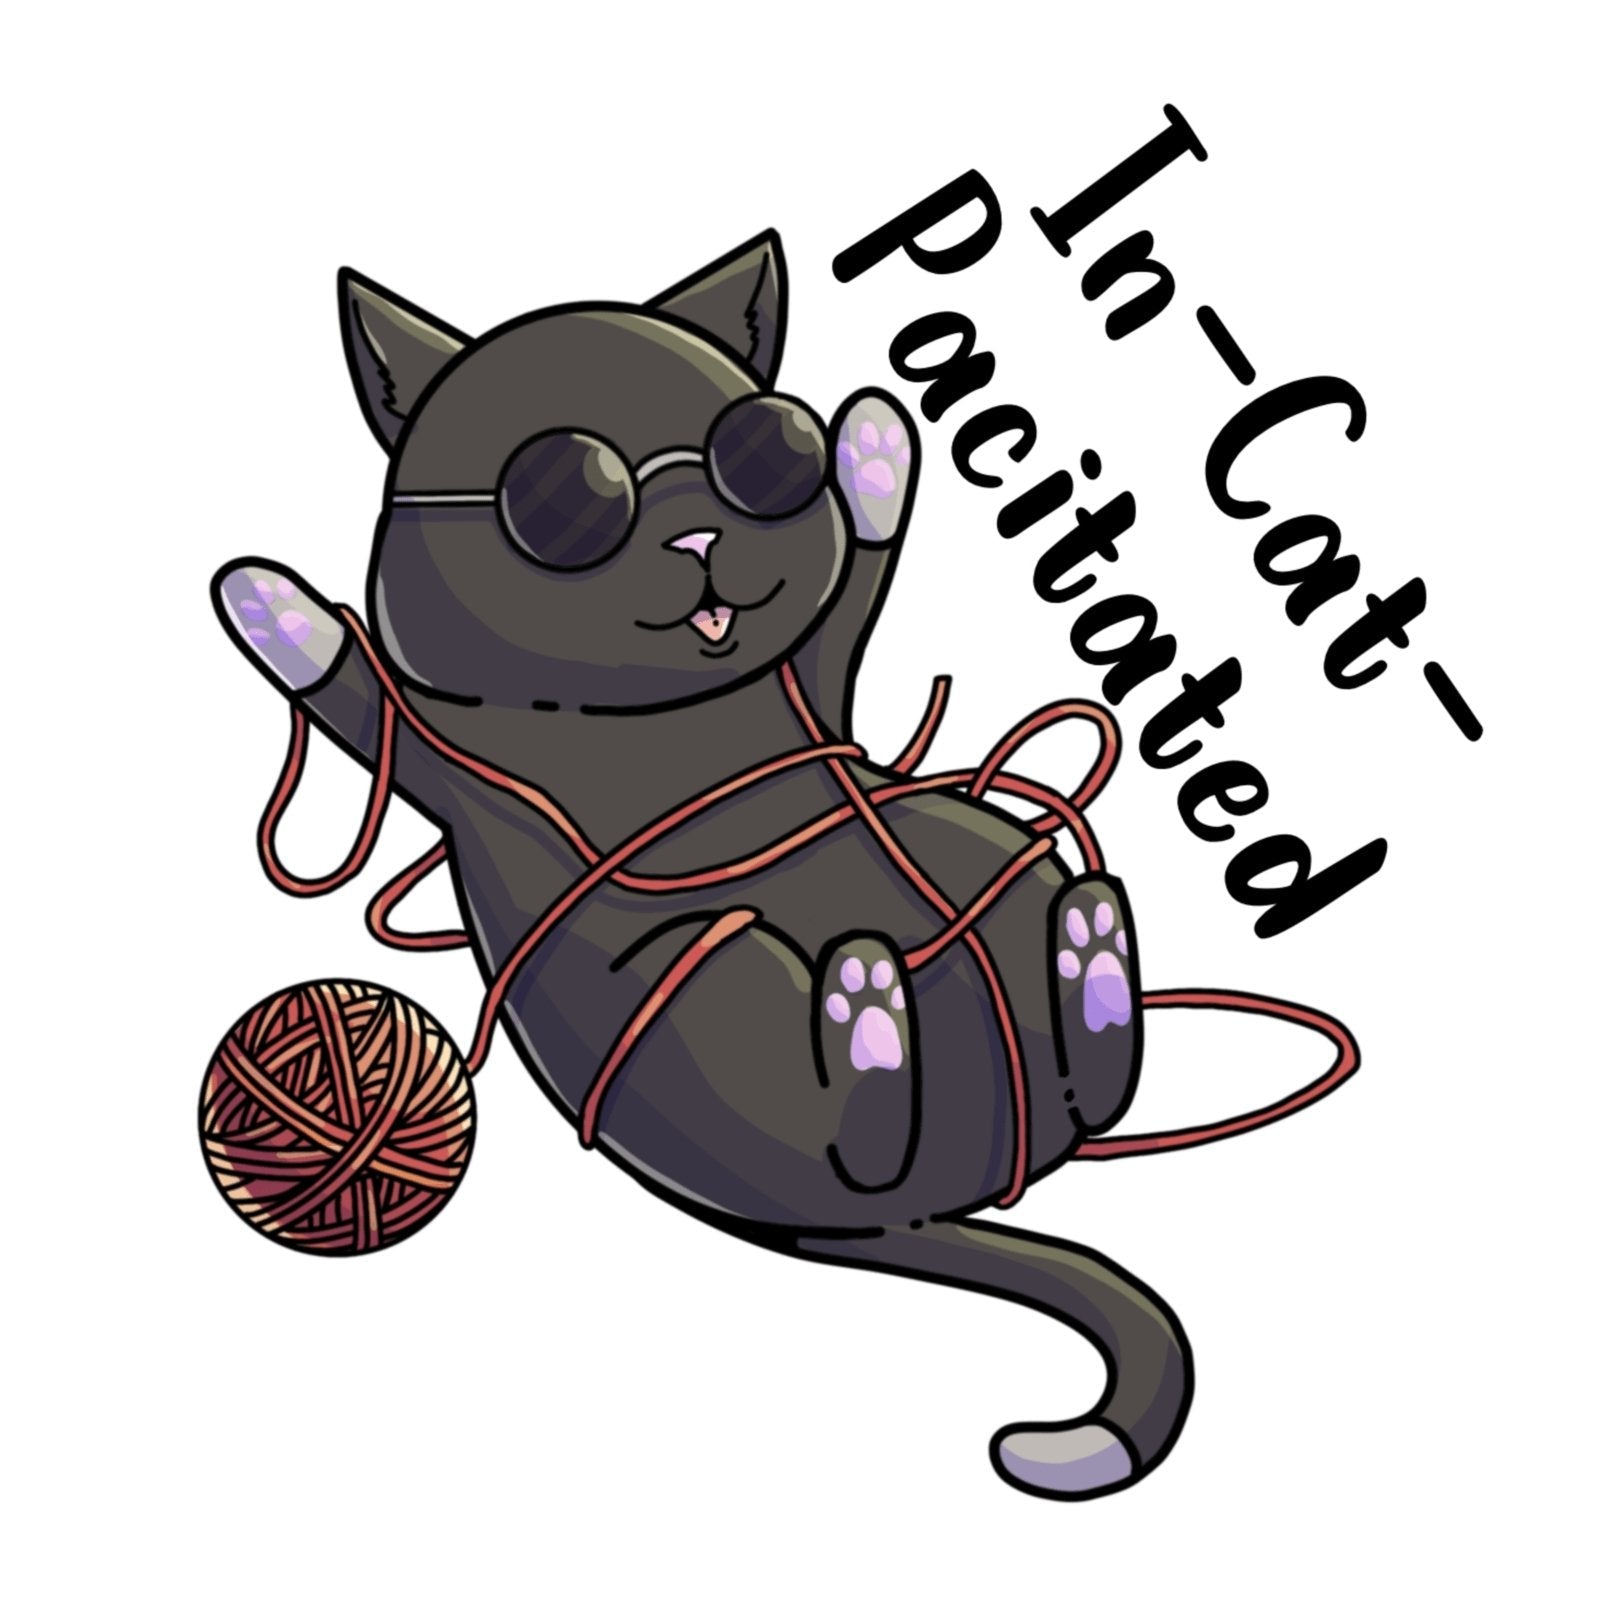 In-cat-pacitated 1.5" Acrylic Pin | DevKrea - Deviantkreations